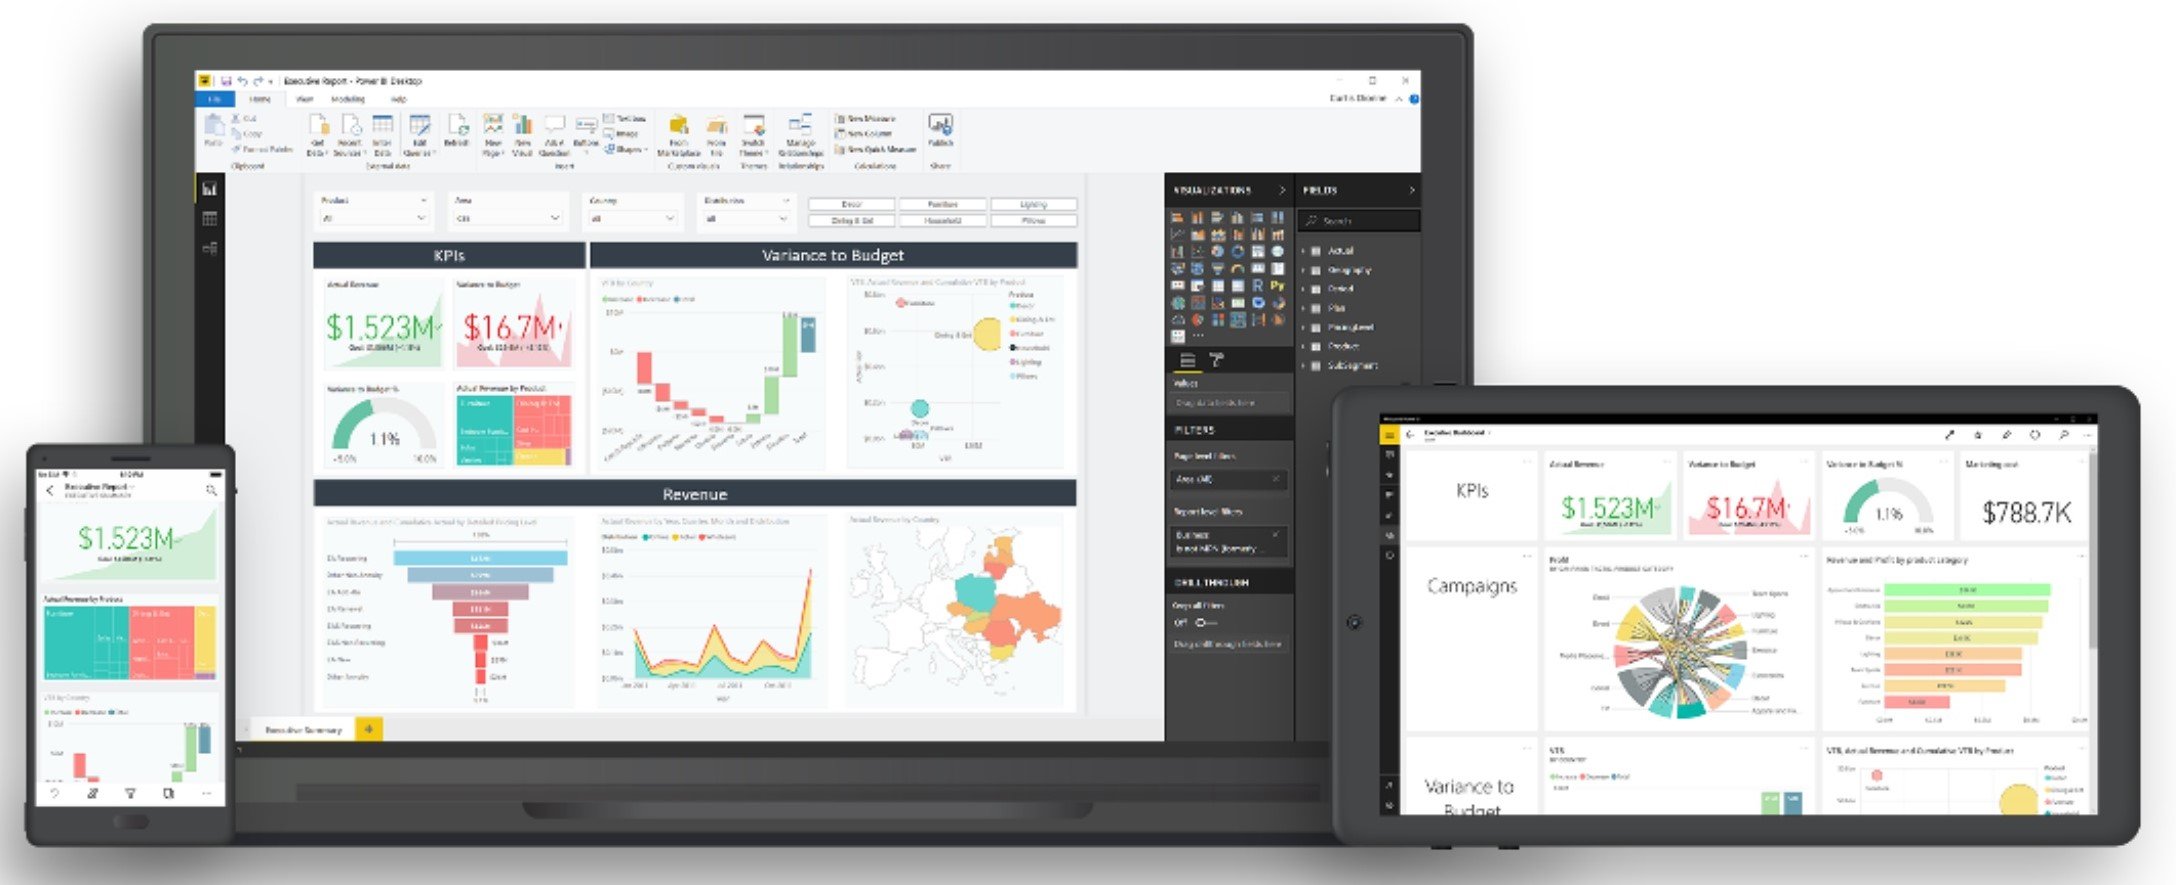 Bismart continues to be a preferred Power BI partner of Microsoft